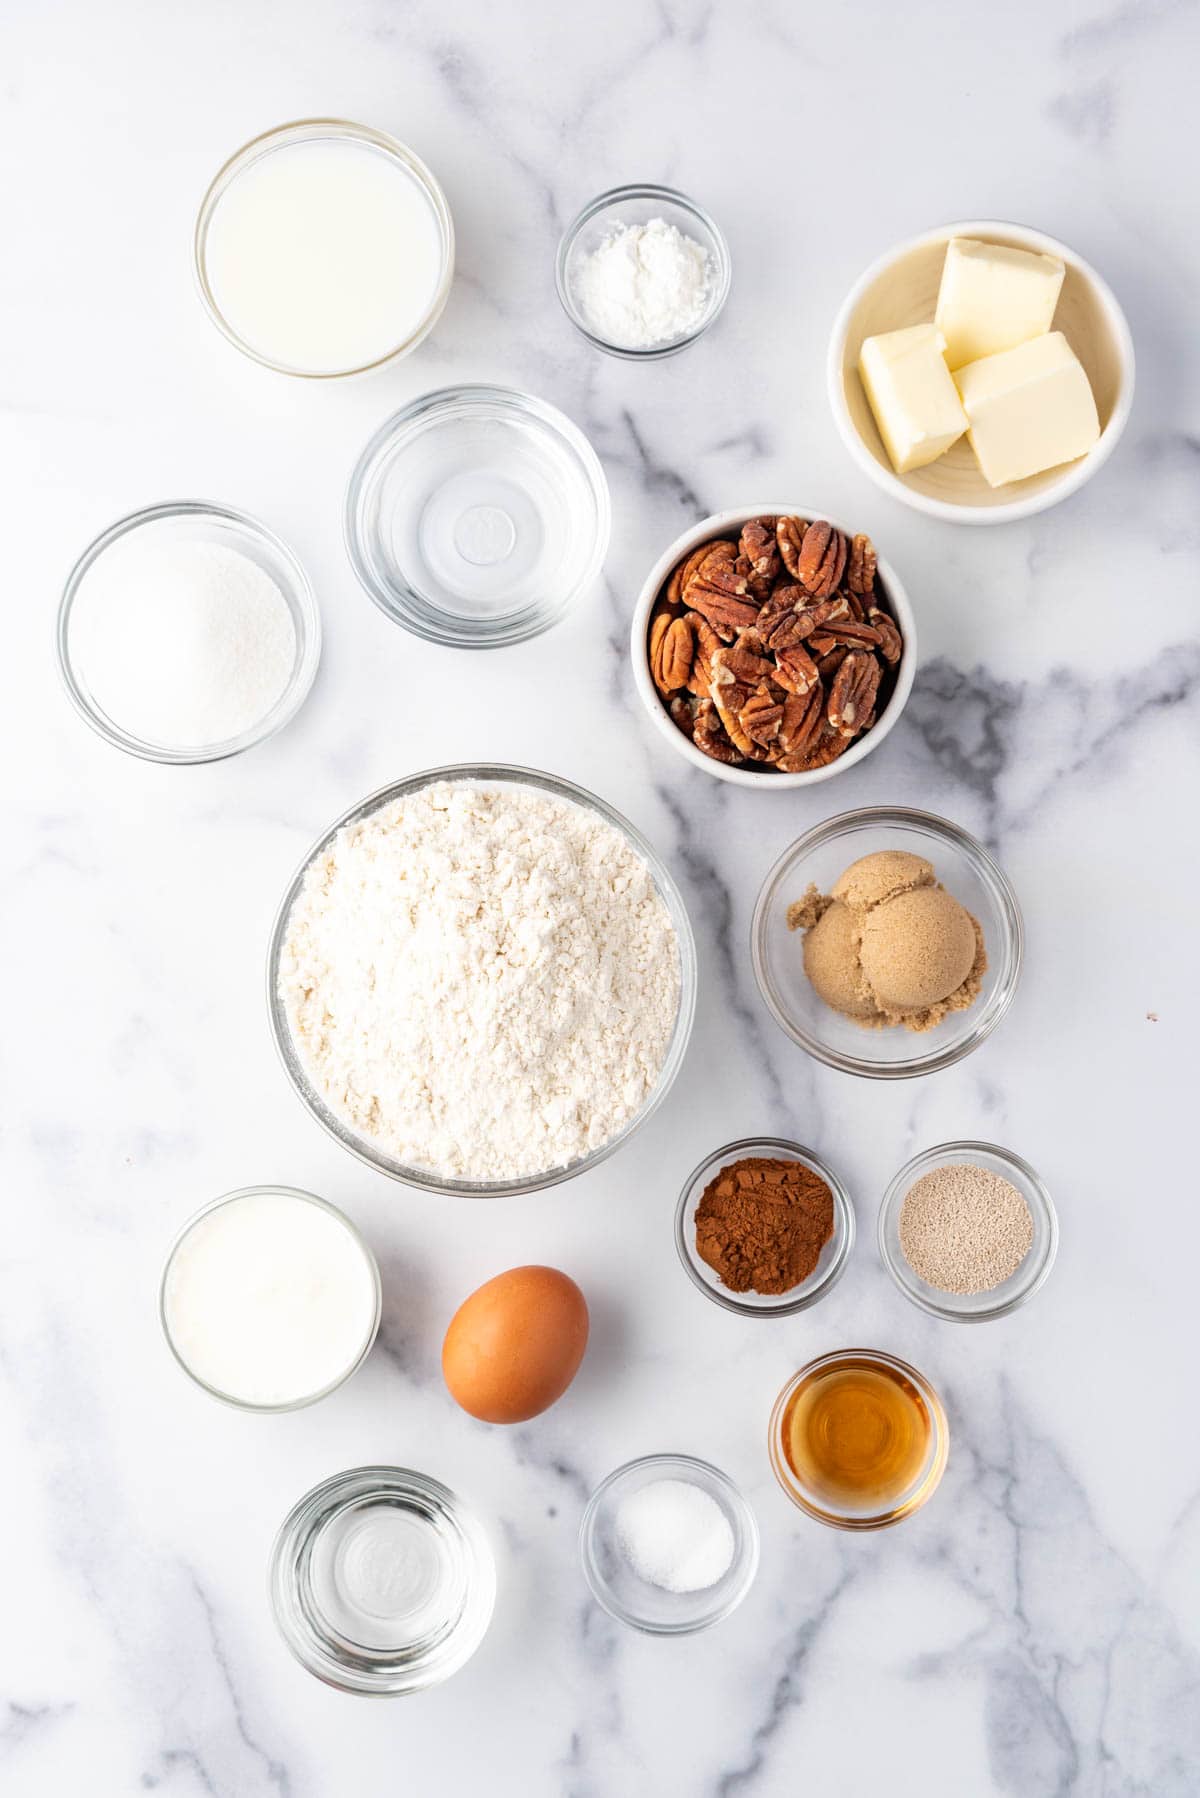 Ingredients for small batch sticky buns.